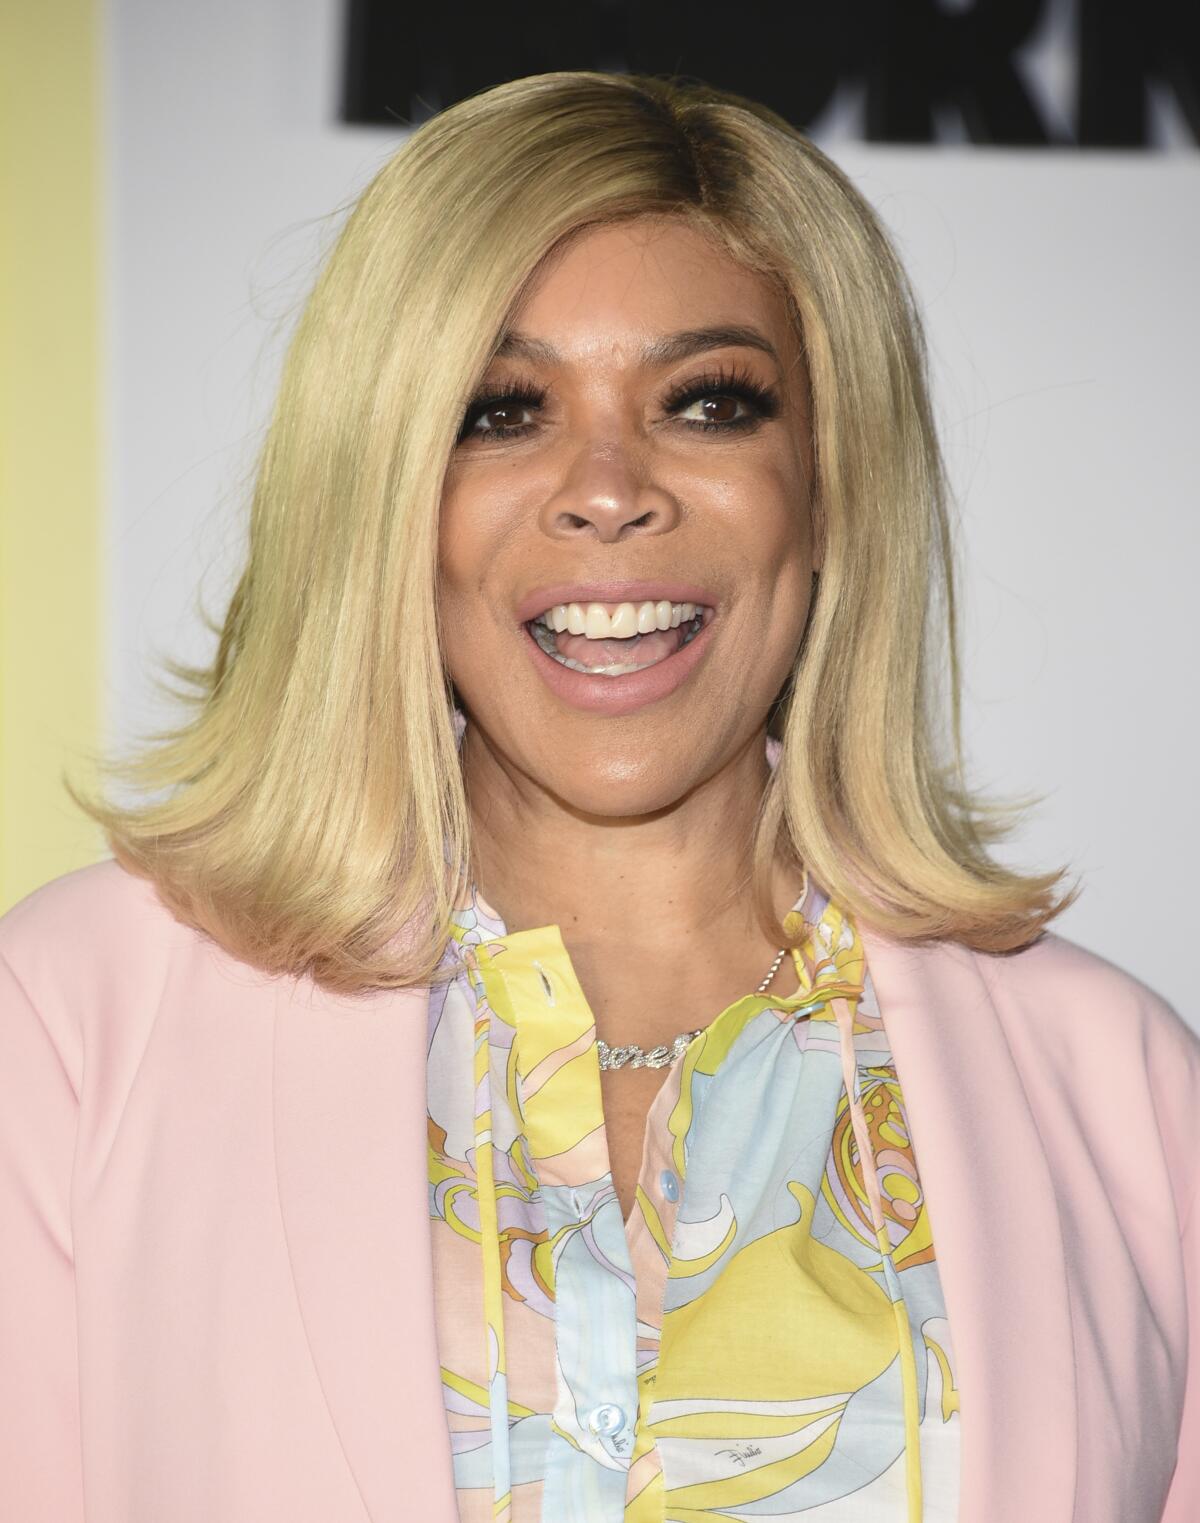 Wendy Williams smiling in a colorful shirt and pink jacket